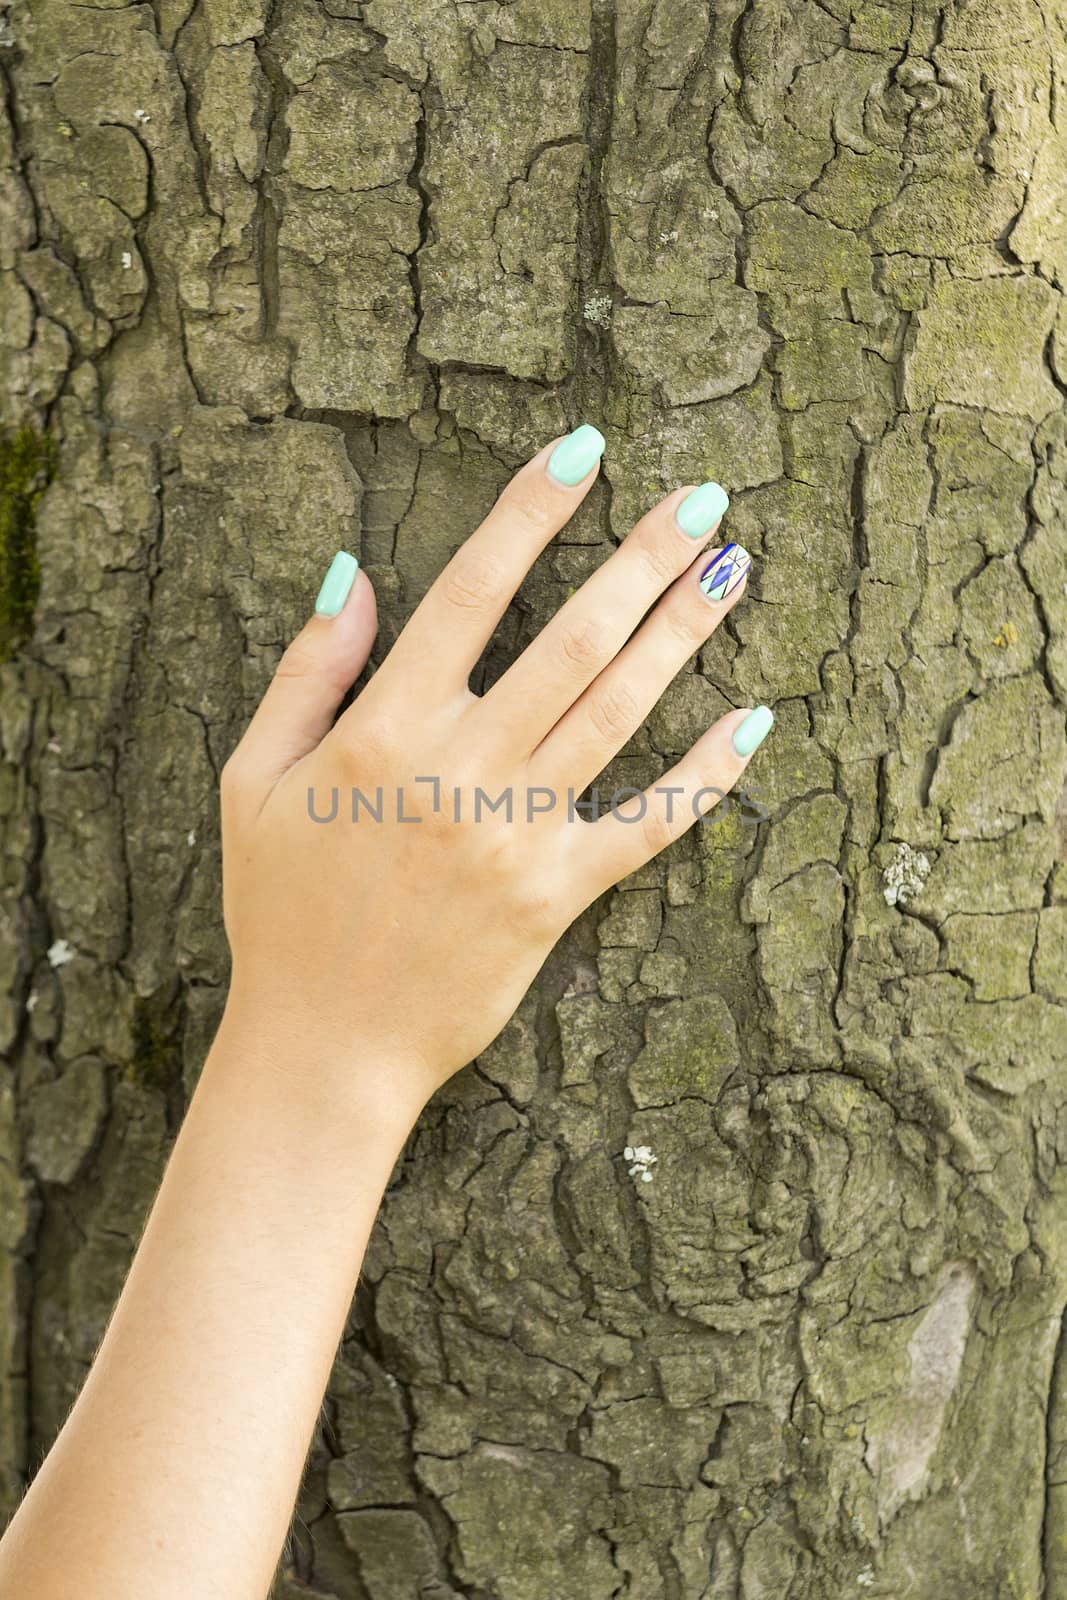 Arm girls with beautiful manicure touches the tree bark